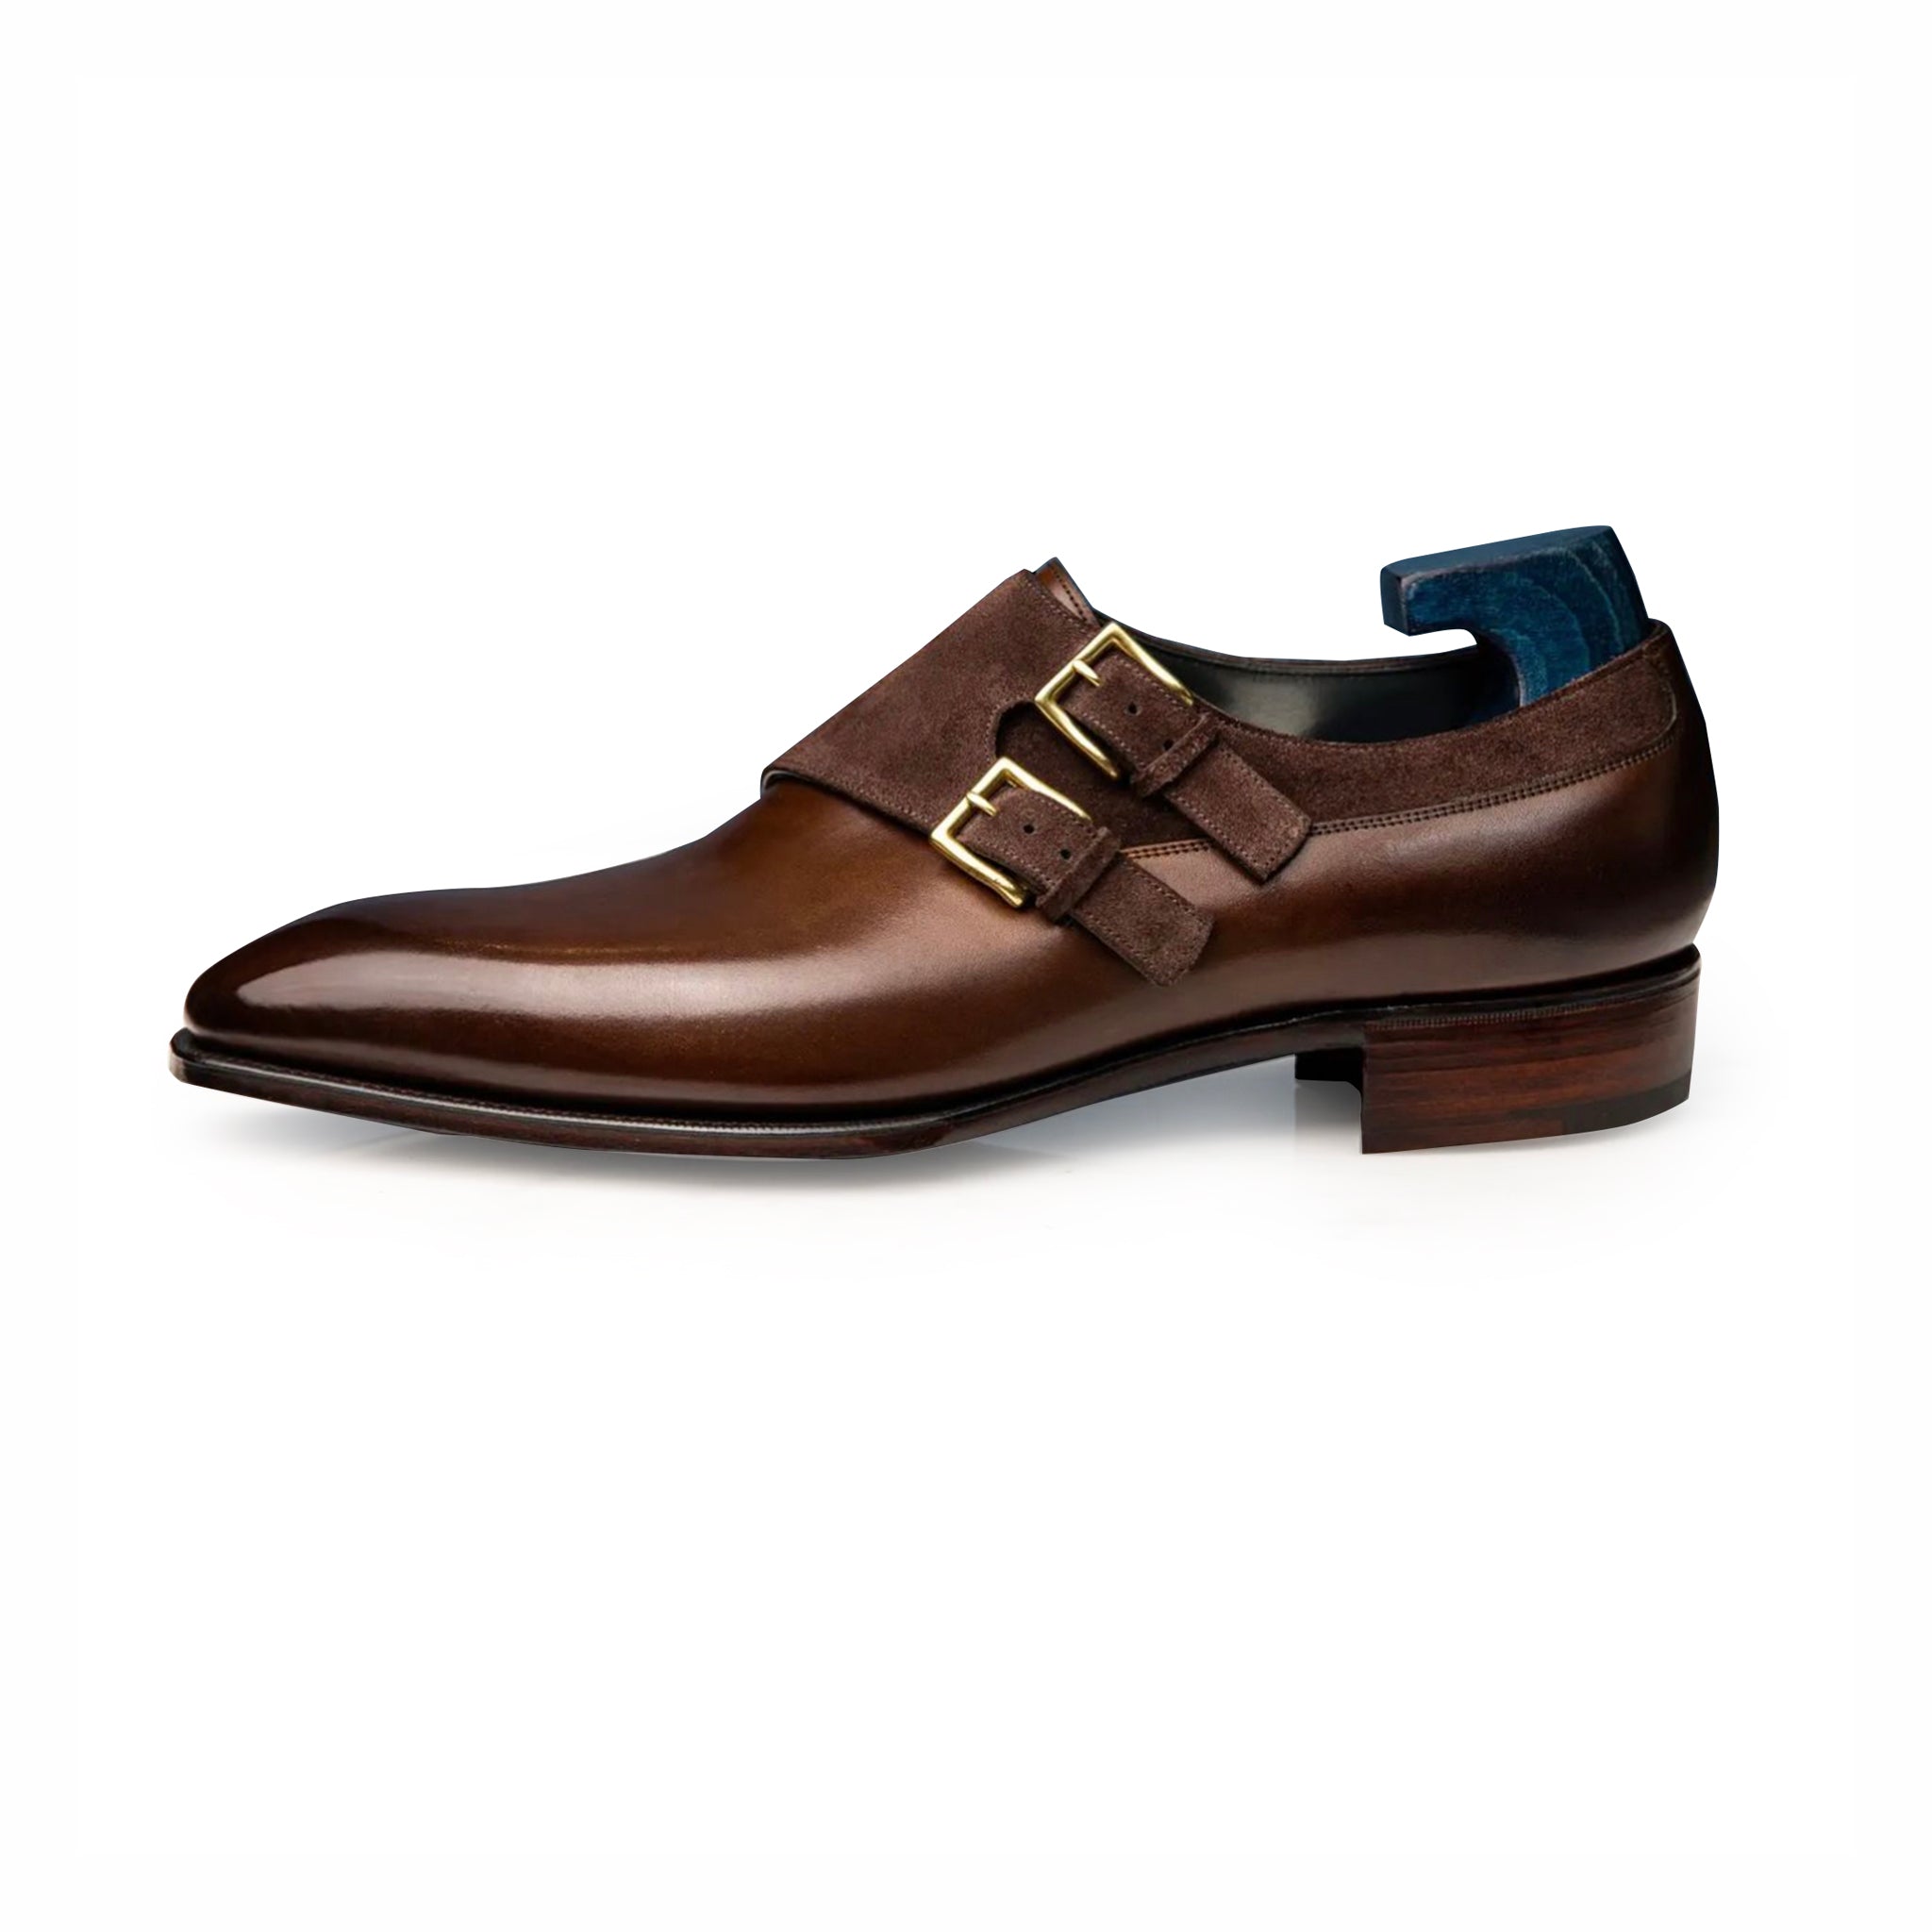 Tanned Cocoa Double Monk Straps Shoes